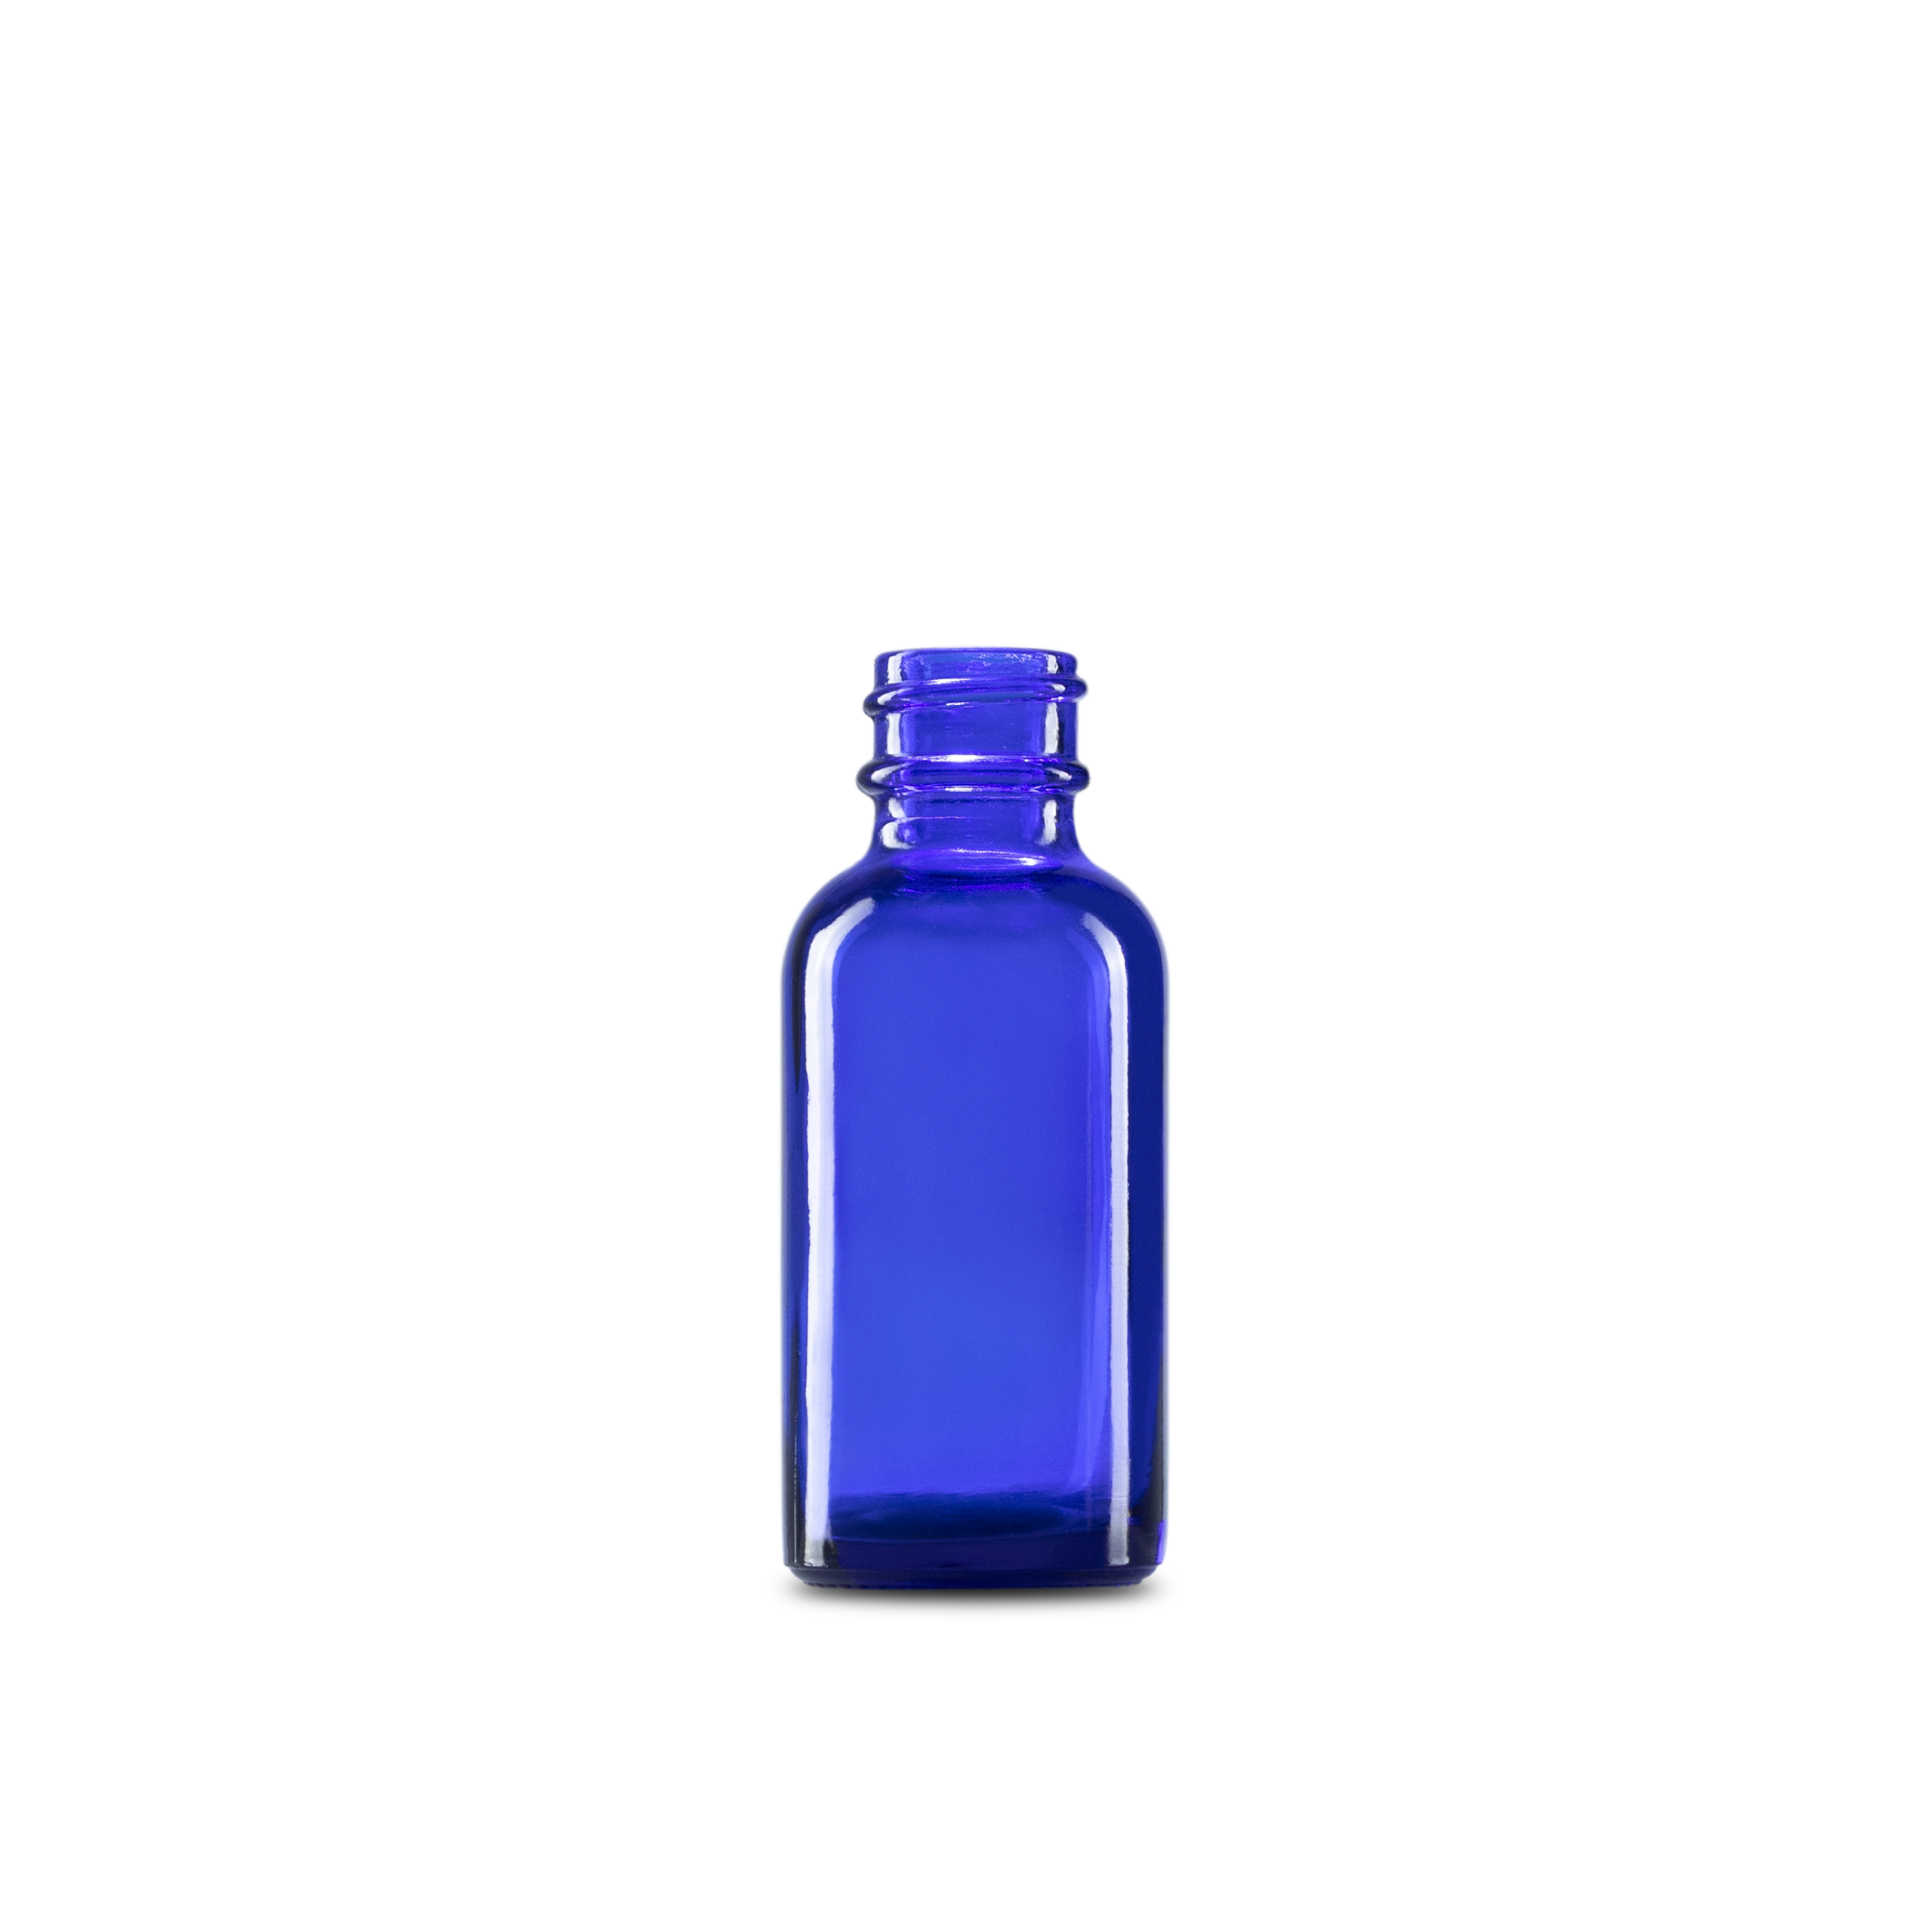 1 oz blue glass bottle is perfect for storing oils, perfumes, and more. this bottle is great because it has a very nice finish to protect it